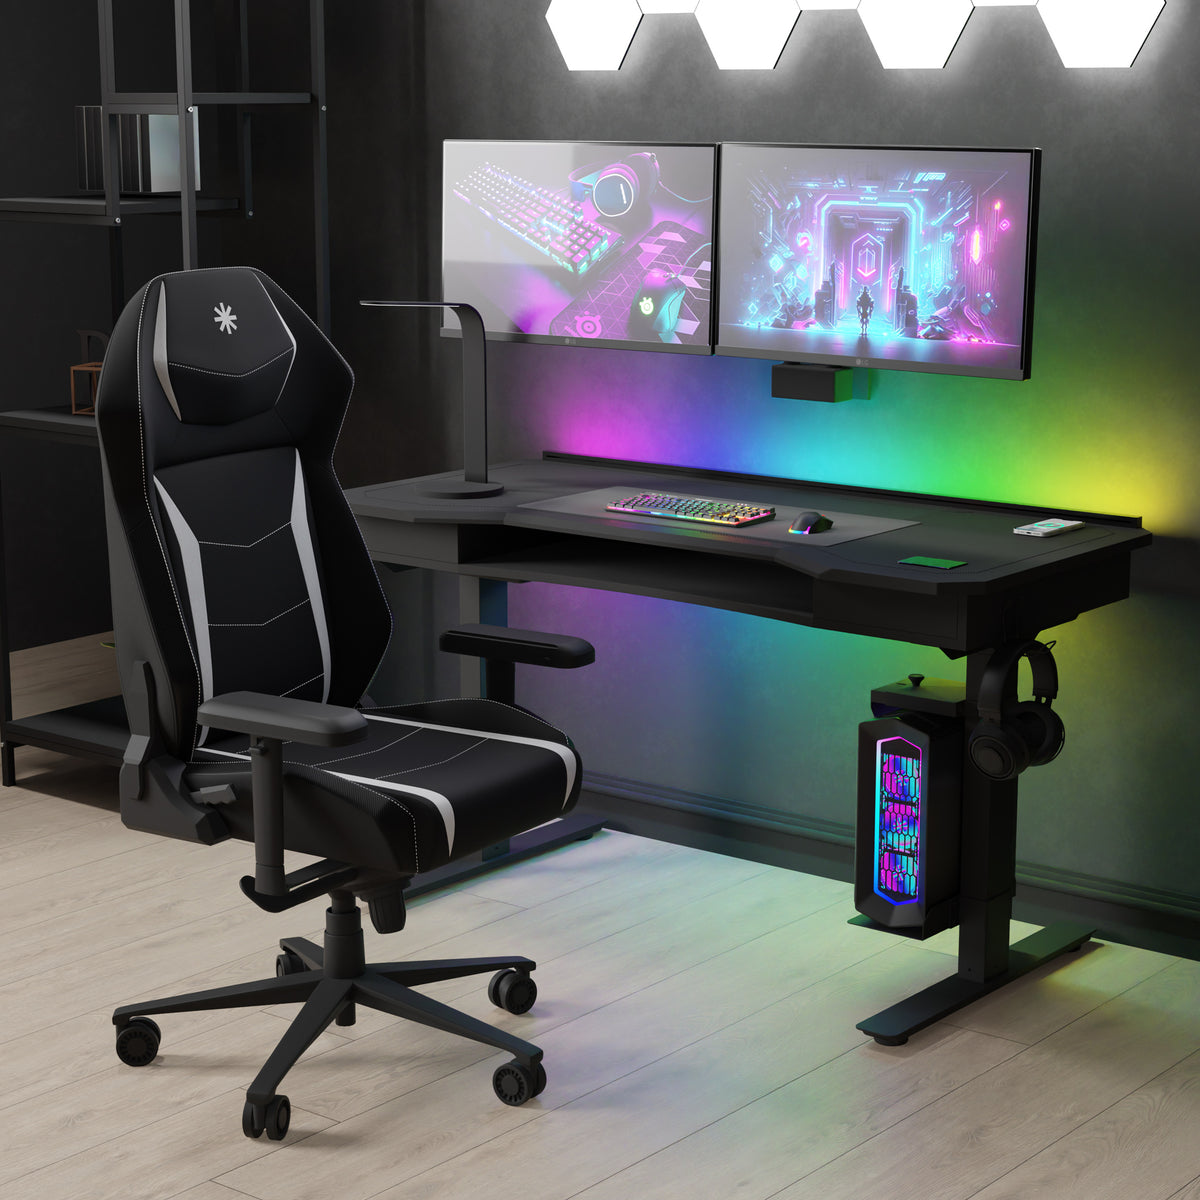 Koble Vortex Gaming Chair with White Accents for home office or bedroom